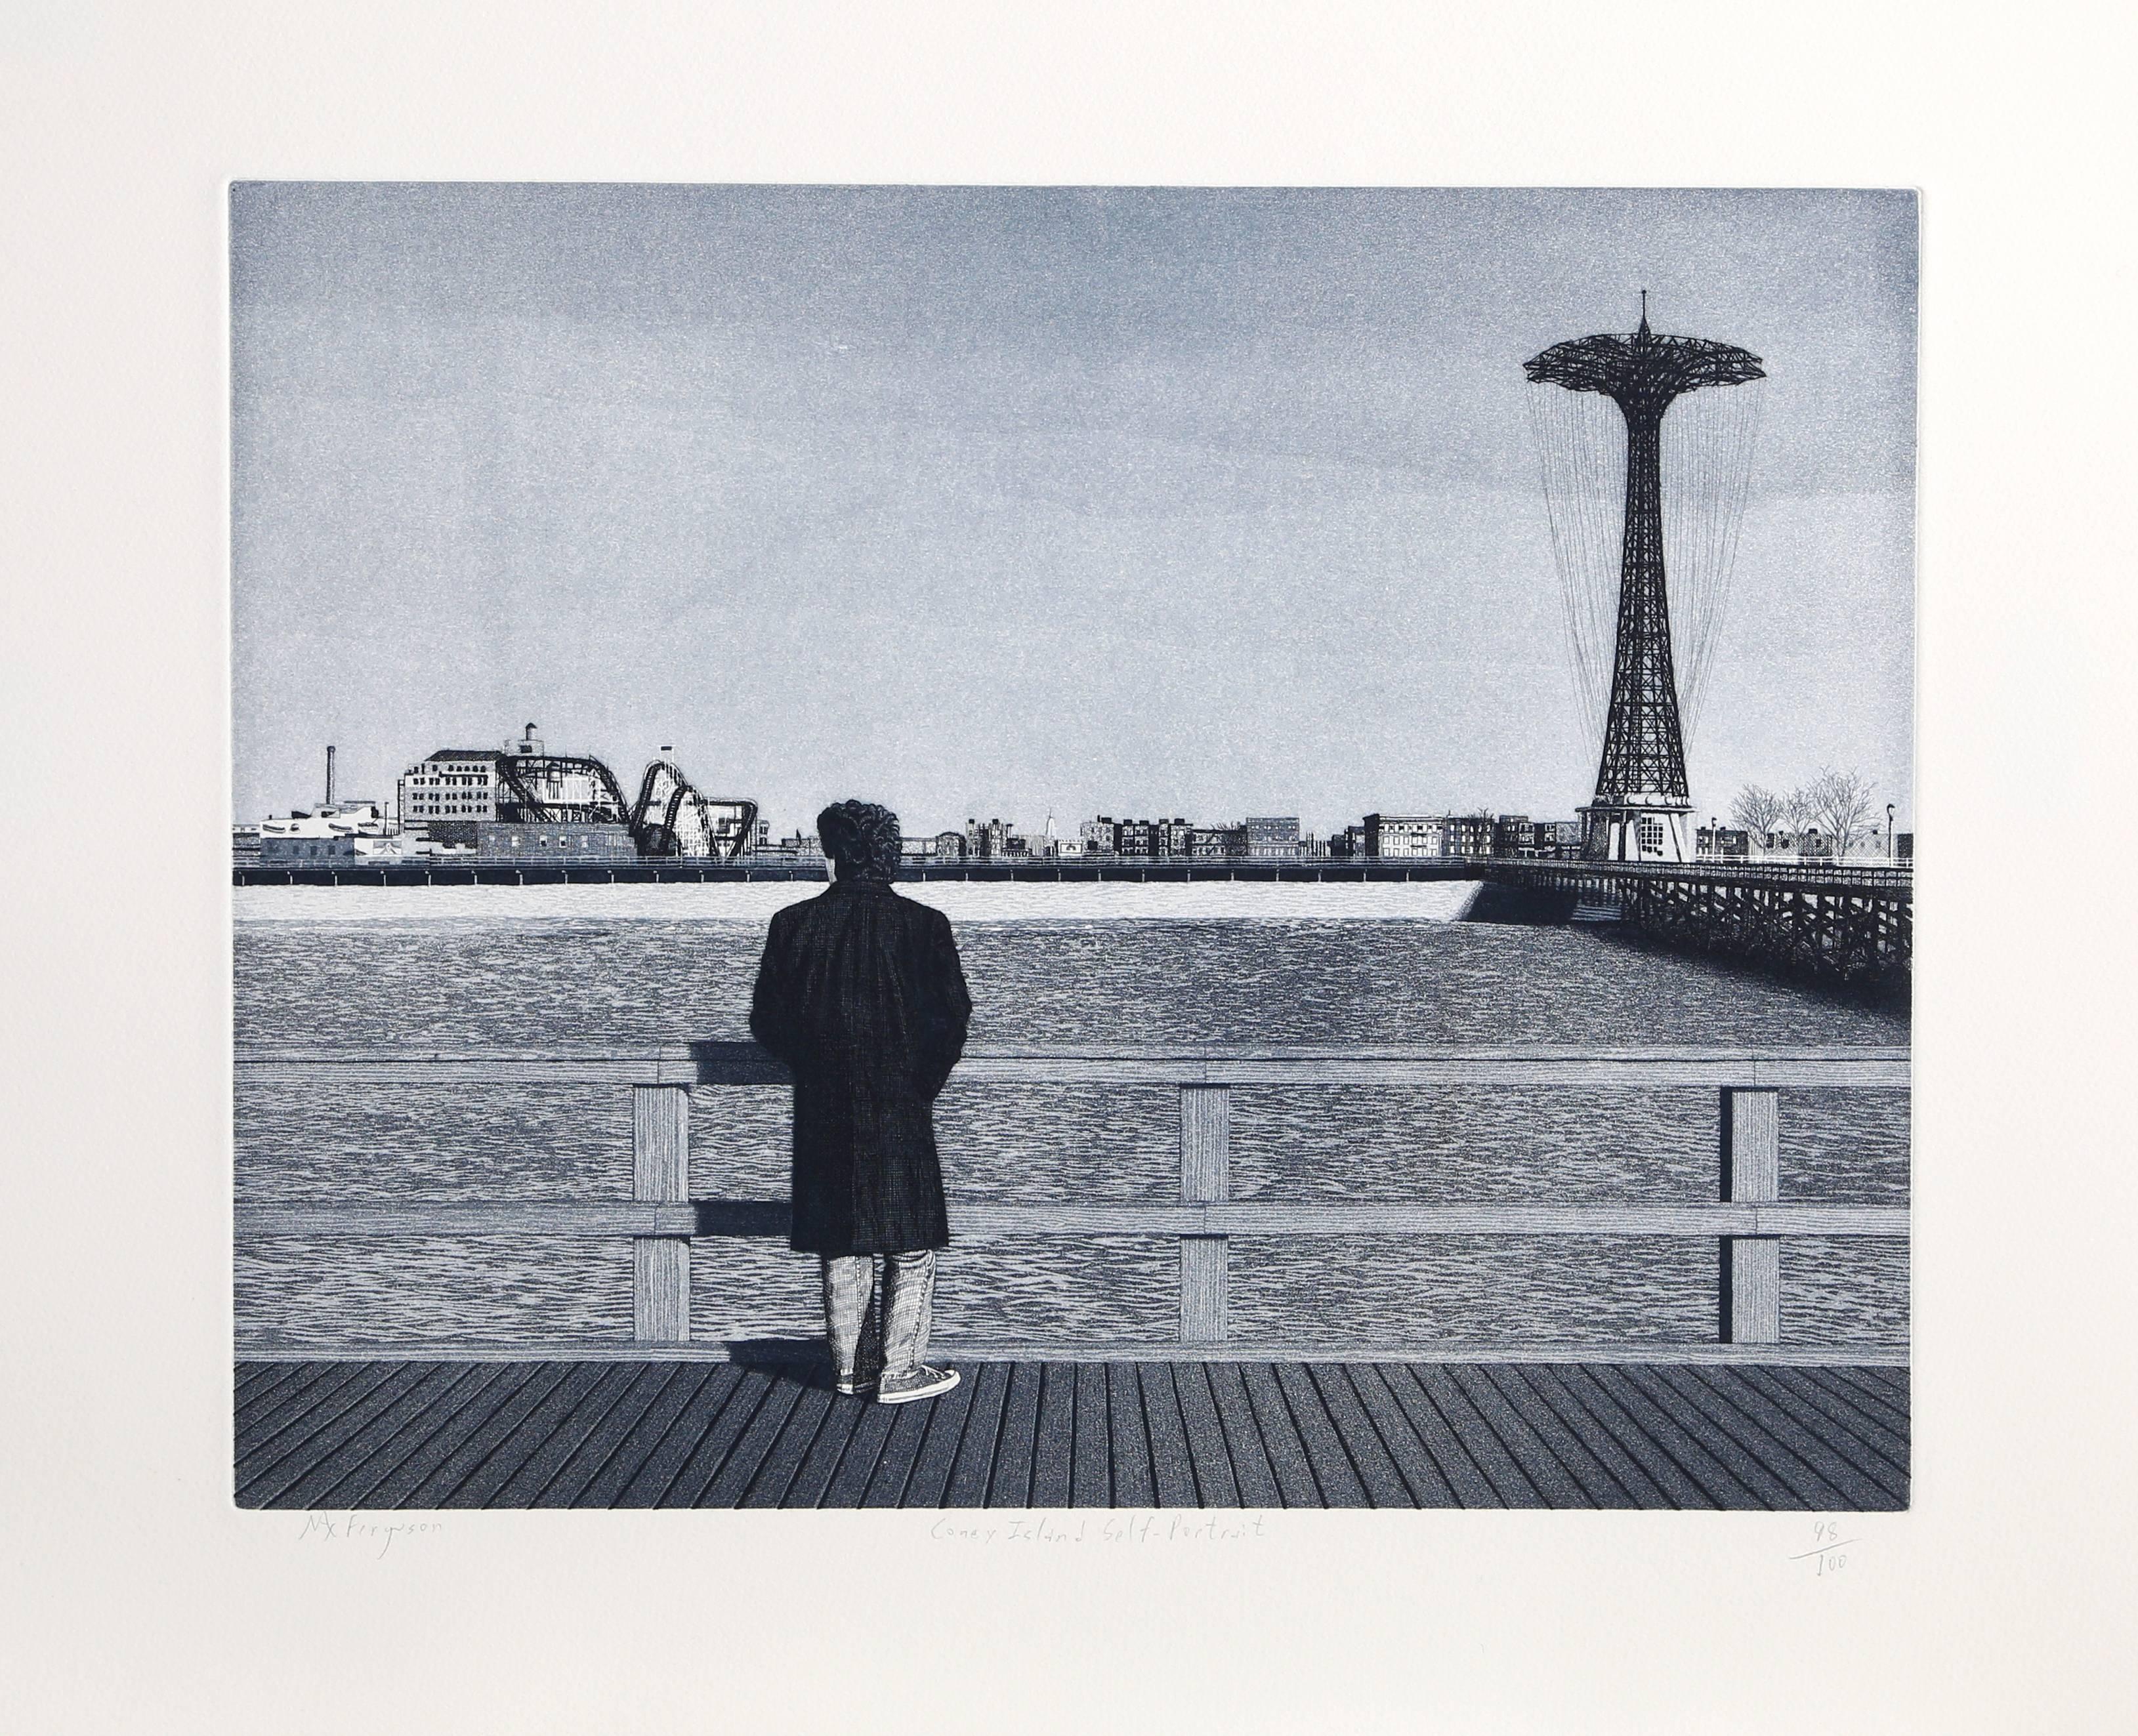 Artist: Max Ferguson, American (1959 - )
Title: Coney Island - Self-Portrait
Medium: Etching with Aquatint, signed and numbered in pencil
Edition: 100
Image Size: 14.5 x 18.5 inches
Size: 21 x 27 in. (53.34 x 68.58 cm)